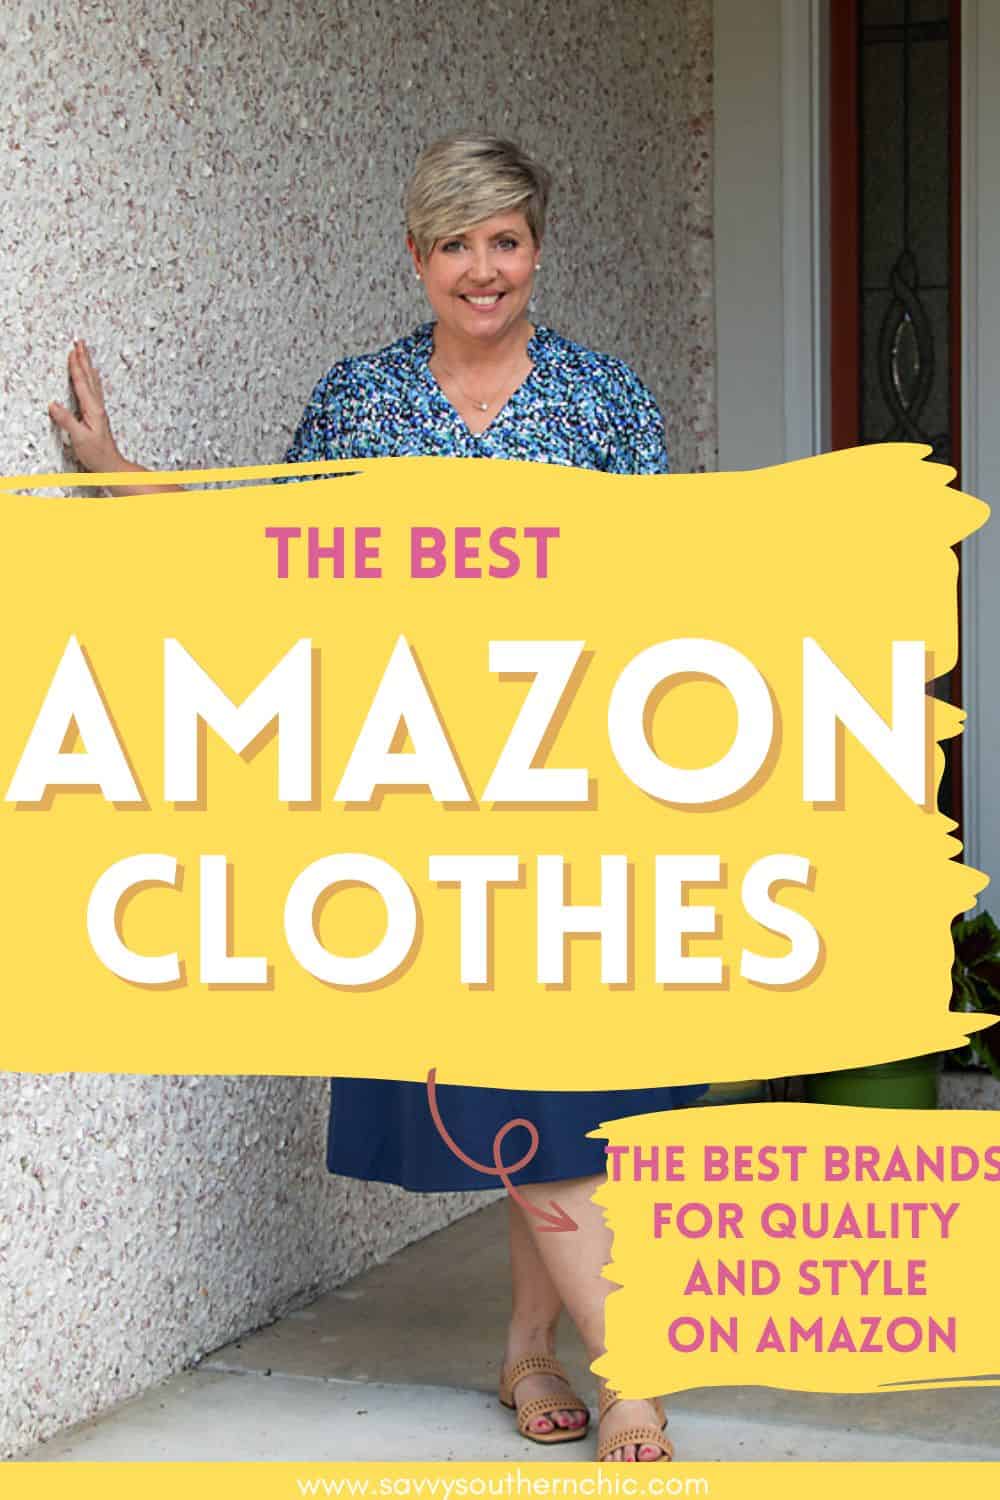 The Best Amazon Clothes